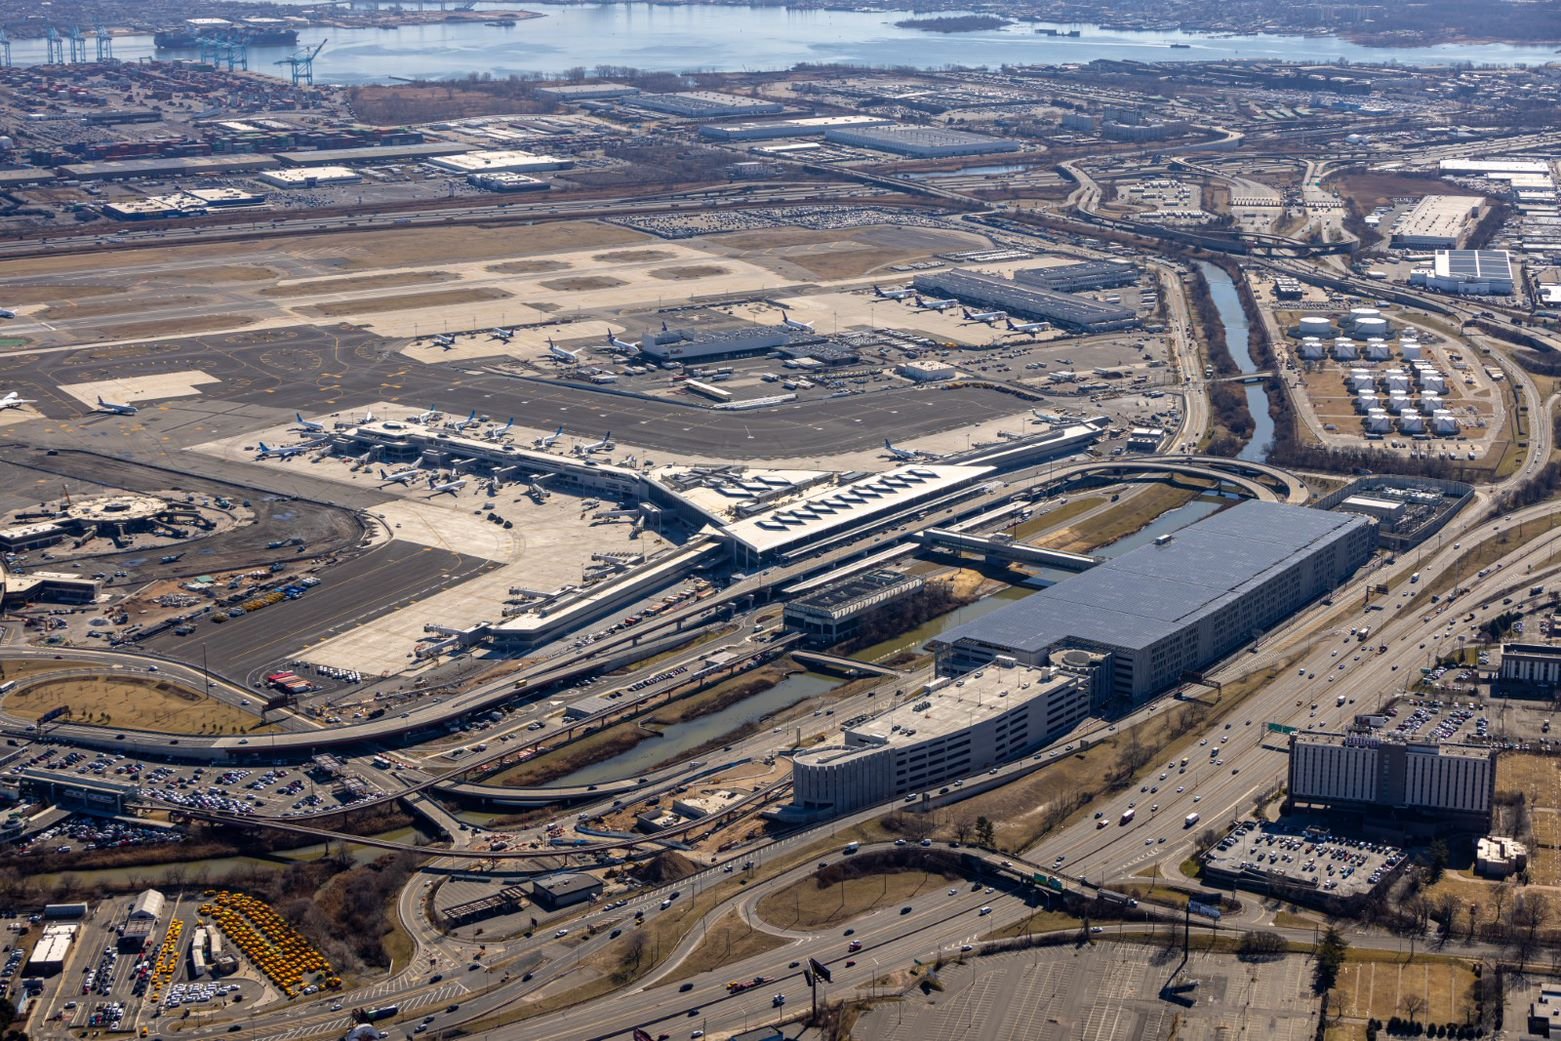 The rooftop solar power array at EWR's new Terminal A is the largest of its kind in the US